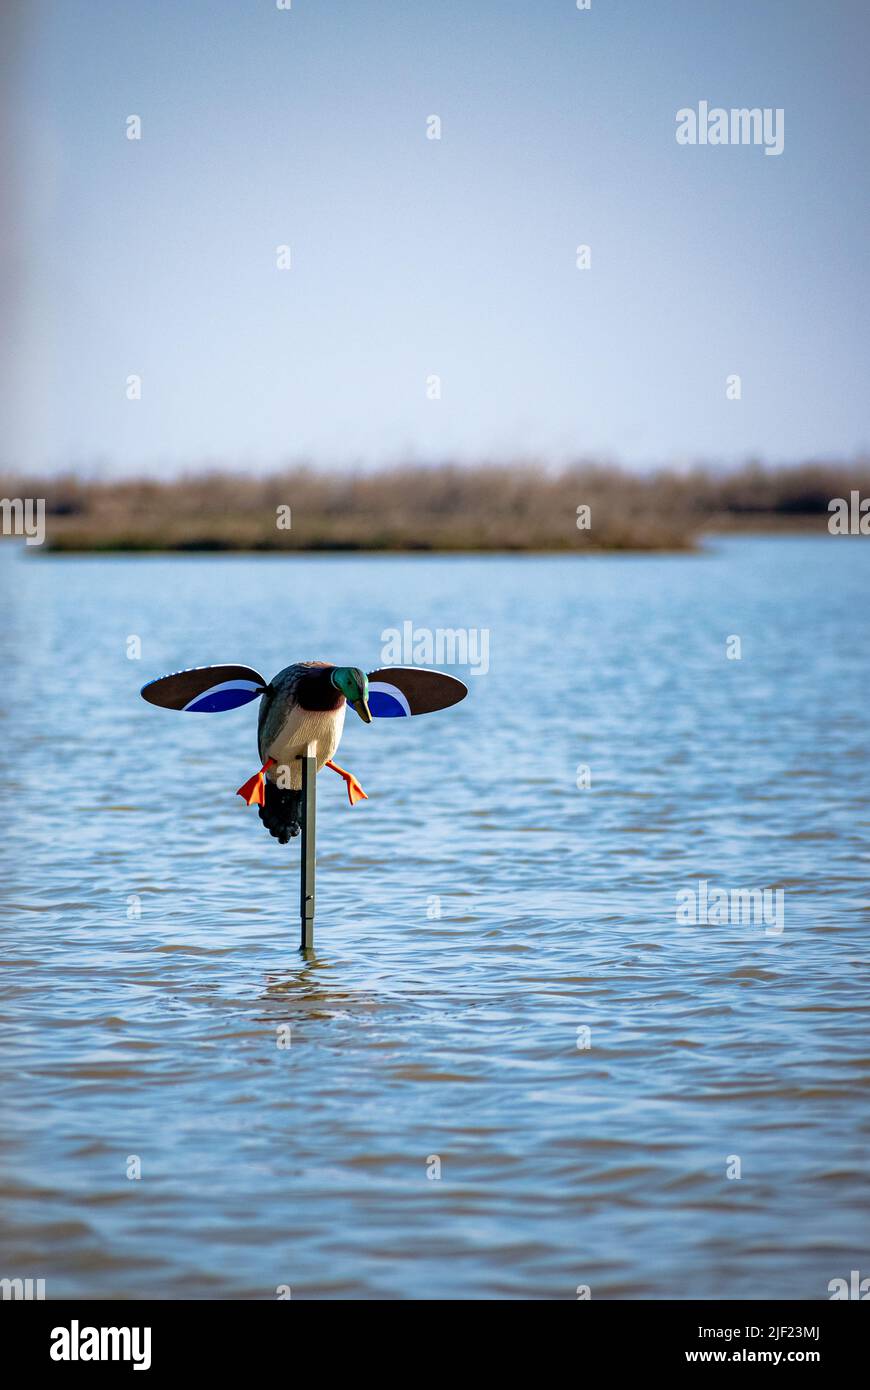 A duck decoy with motorized spinning wings in the field. Stock Photo